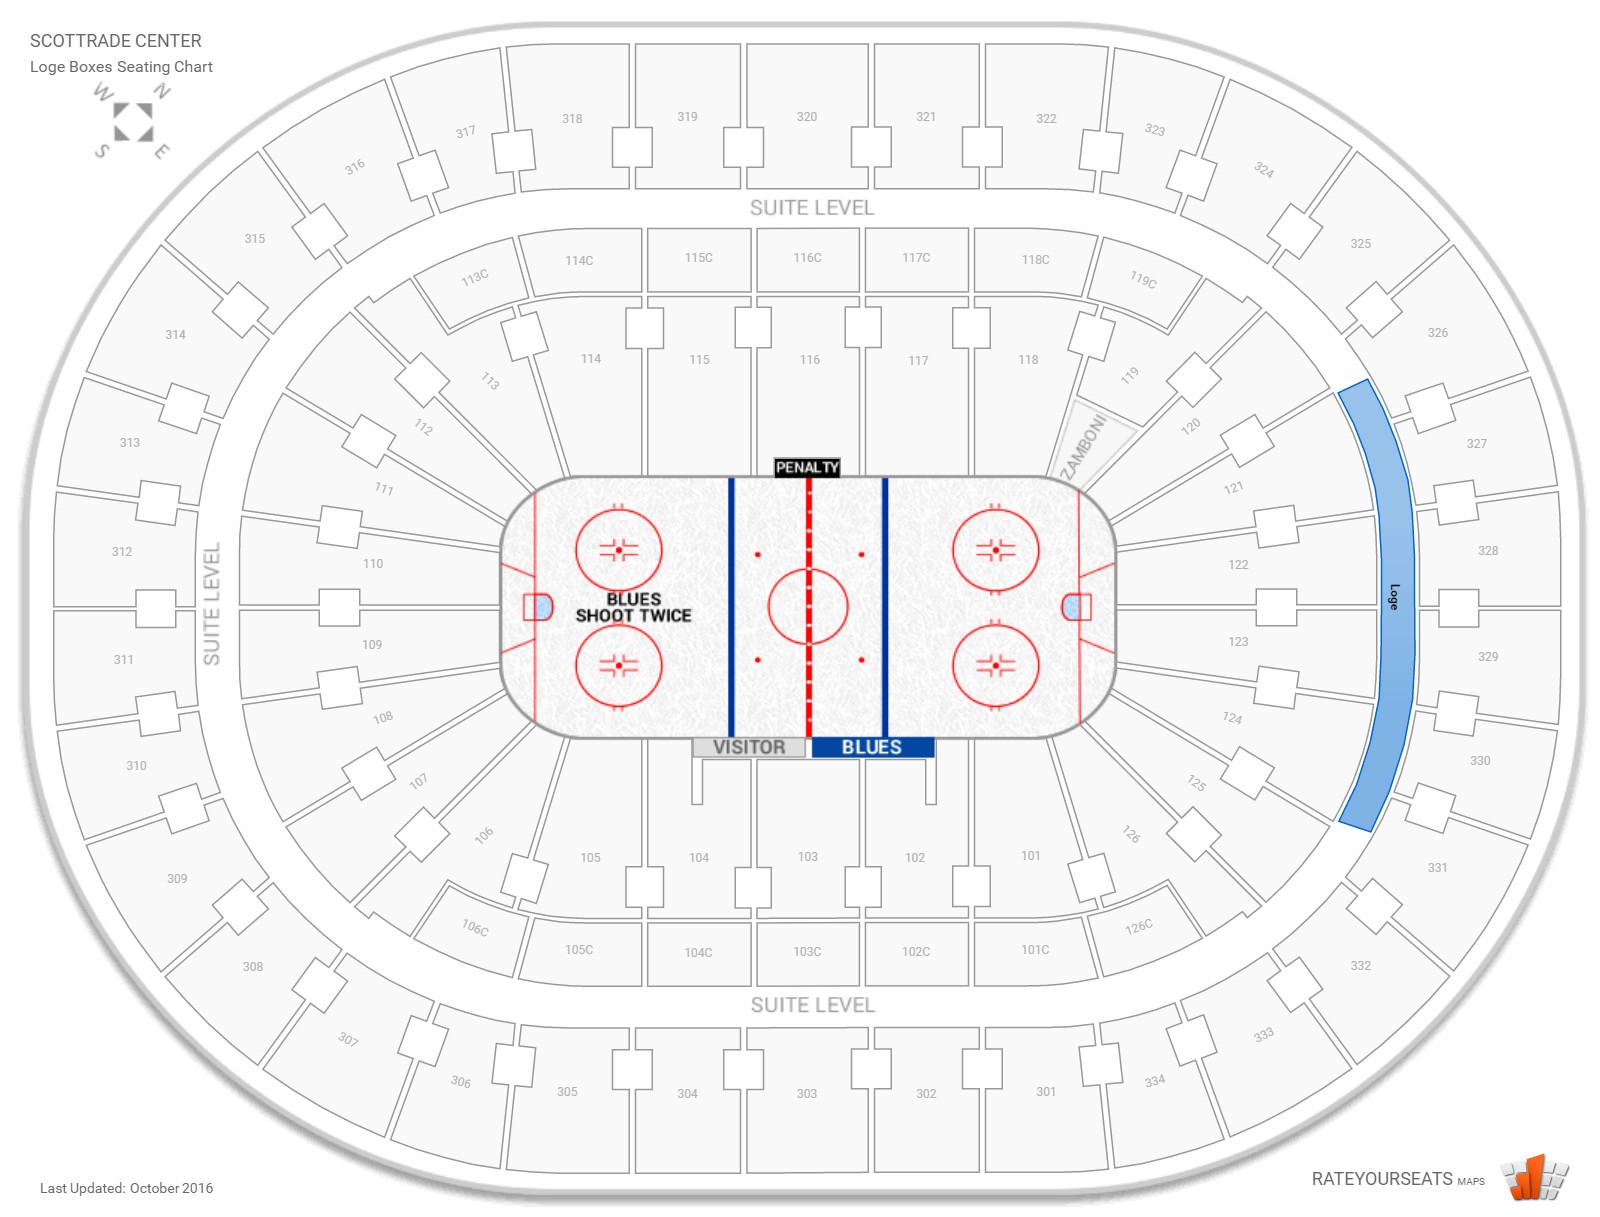 Club and Premium Seating at Scottrade Center - mediakits.theygsgroup.com